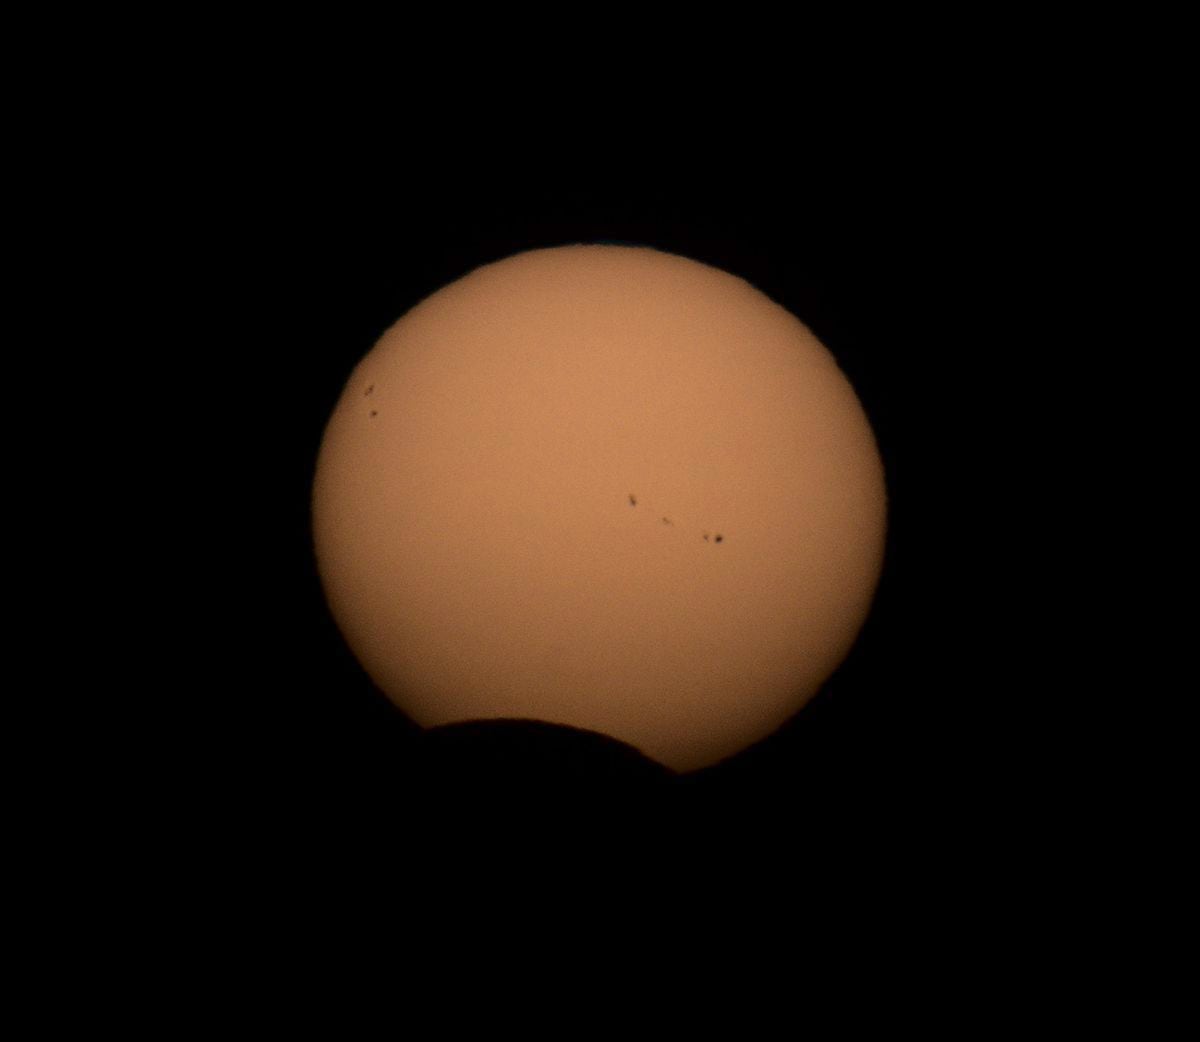 A partial solar eclipse – the end of the Great American Eclipse of 21 August 2017, taken at sunset from Pleinmont  by Elaine Mahy. Sunspots are visible in this shot taken with a Baader Astrosolar Safety Film filter over a 600mm camera lens. The moon is visible in silhouette, overlapping as a dark 'bite' across the Sun. (29628275)